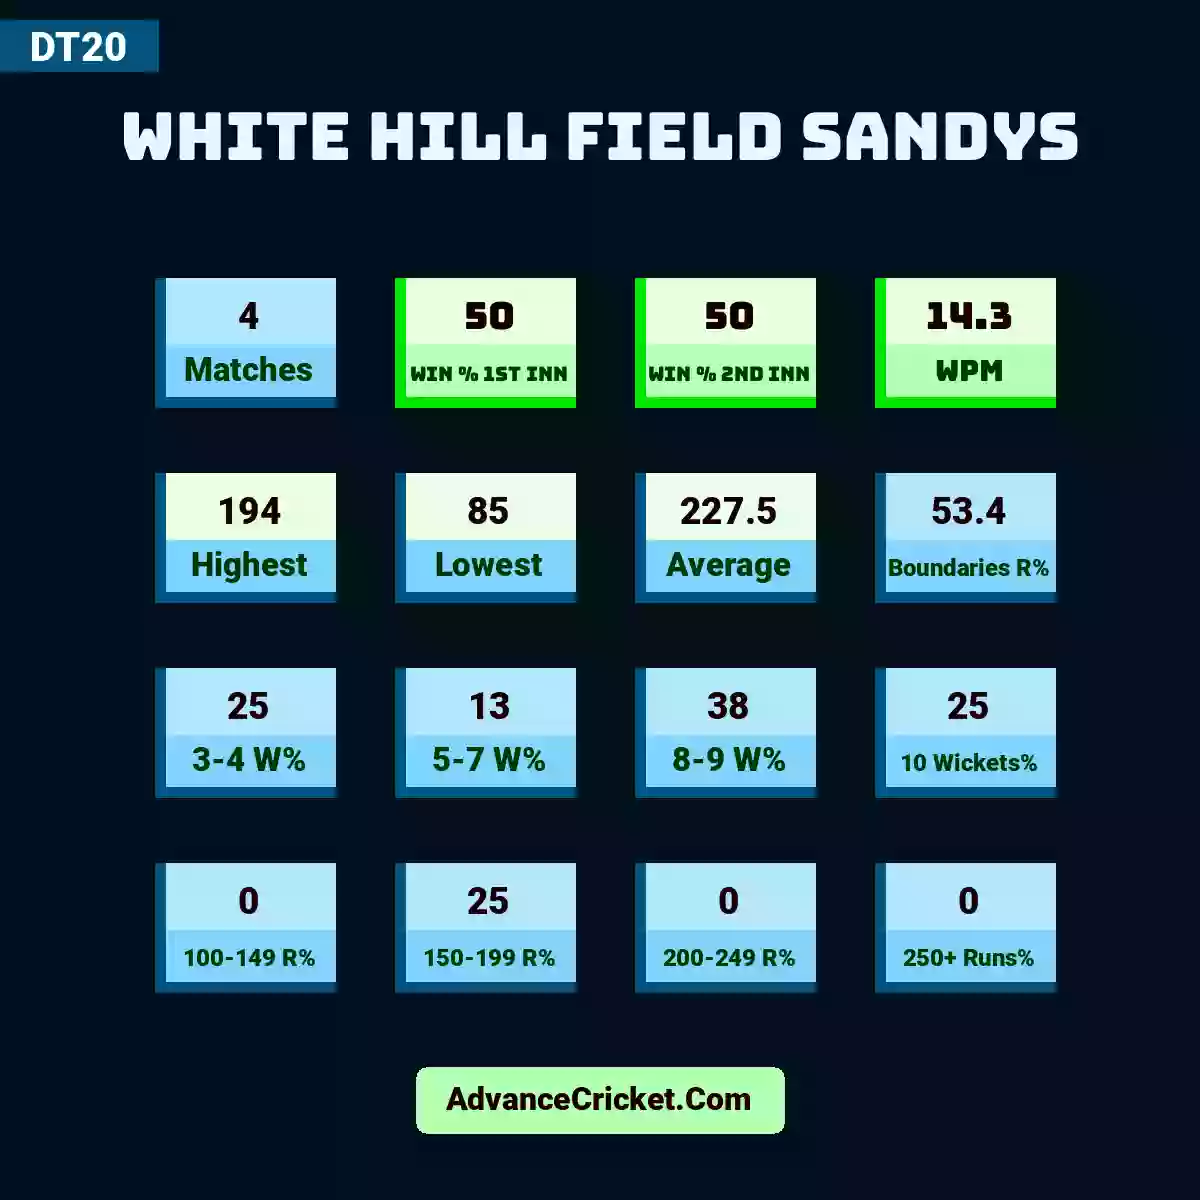 Image showing White Hill Field Sandys with Matches: 4, Win % 1st Inn: 50, Win % 2nd Inn: 50, WPM: 14.3, Highest: 194, Lowest: 85, Average: 227.5, Boundaries R%: 53.4, 3-4 W%: 25, 5-7 W%: 13, 8-9 W%: 38, 10 Wickets%: 25, 100-149 R%: 0, 150-199 R%: 25, 200-249 R%: 0, 250+ Runs%: 0.